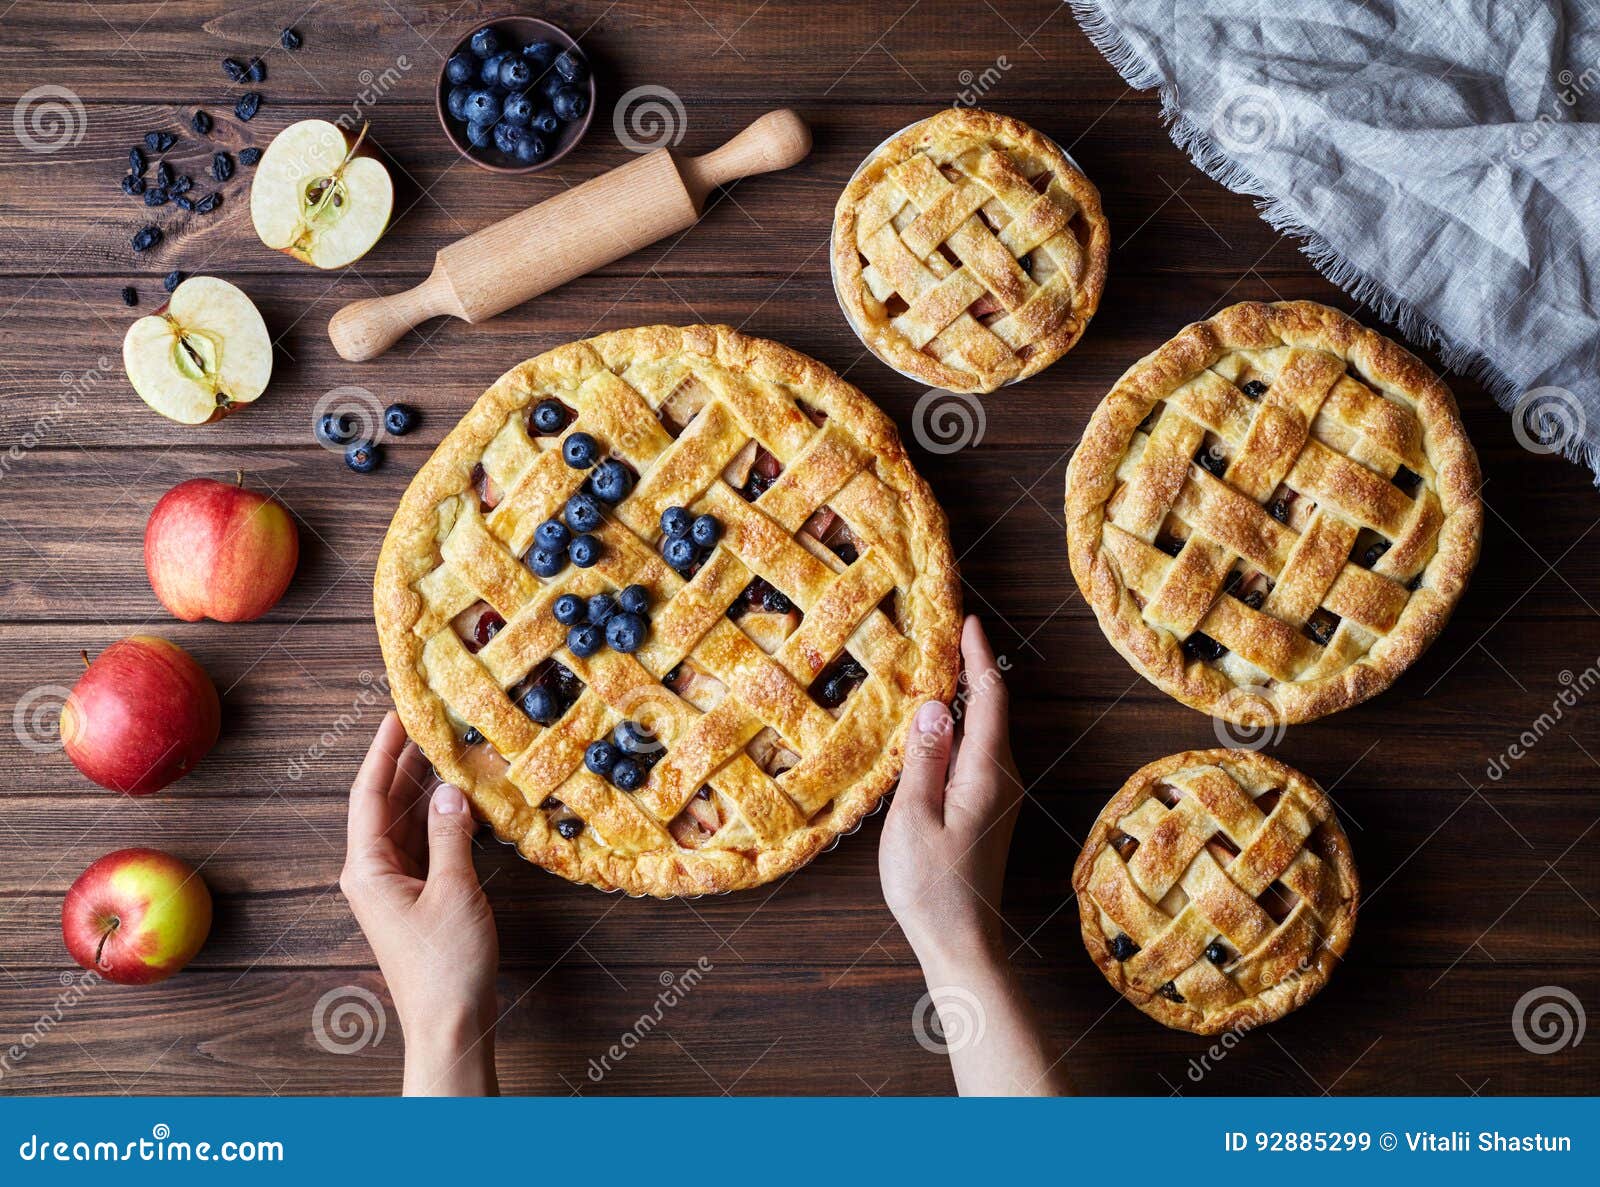 homemade organic apple pies bakery products hold female hands on dark wooden kitchen table with raising, bluberry